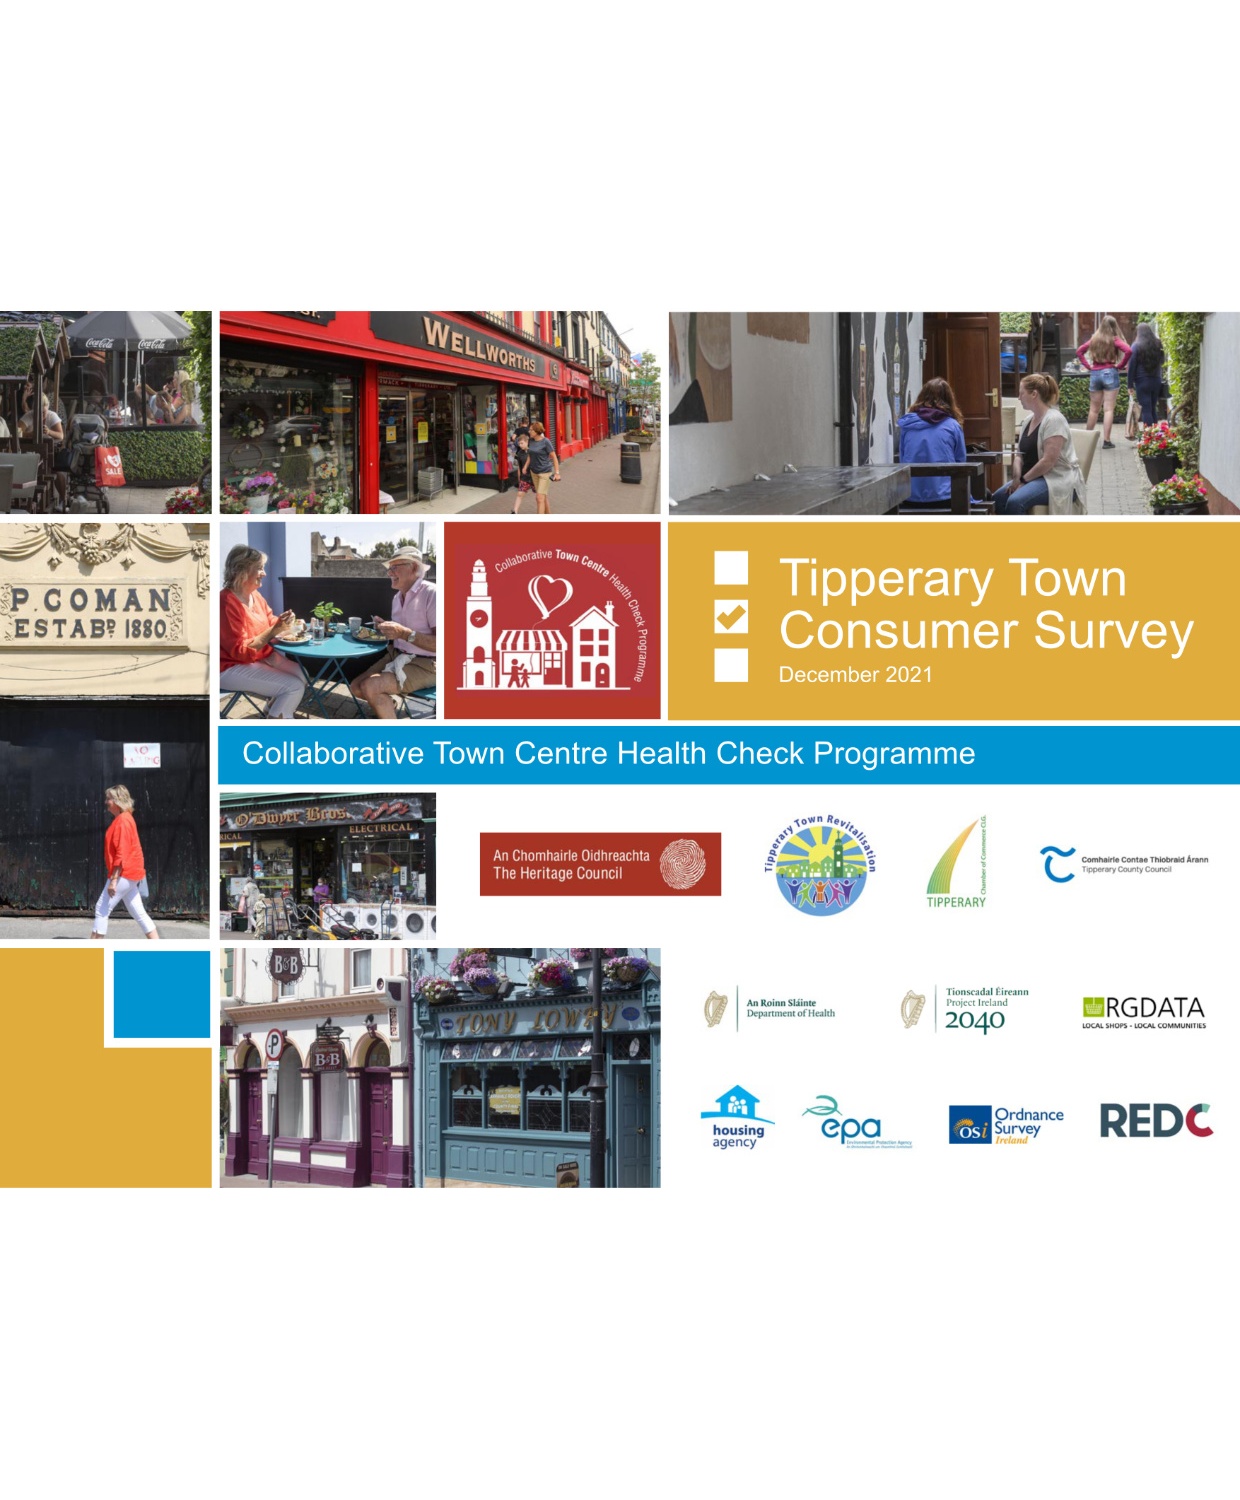 Tipperary Town Consumer Survey